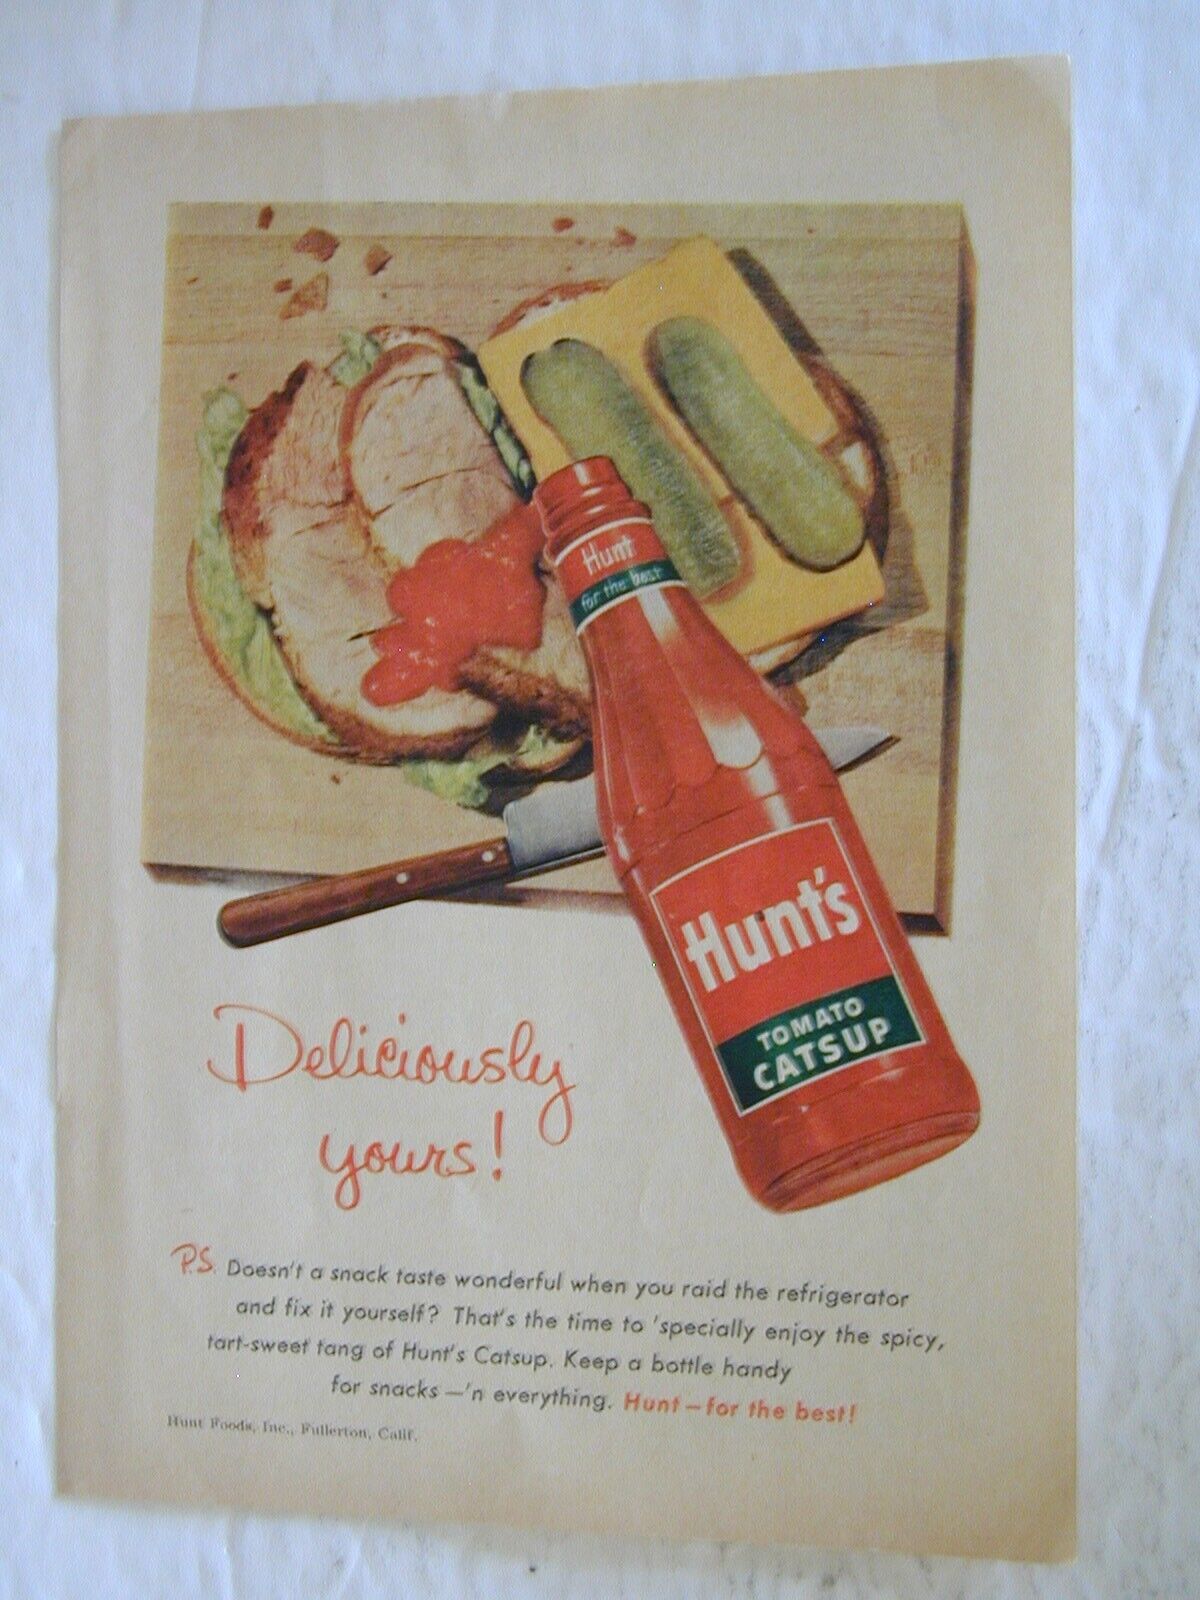 1955 HUNT'S TOMATO CATSUP DELICIOUSLY YOURS VINTAGE PRINT AD L045